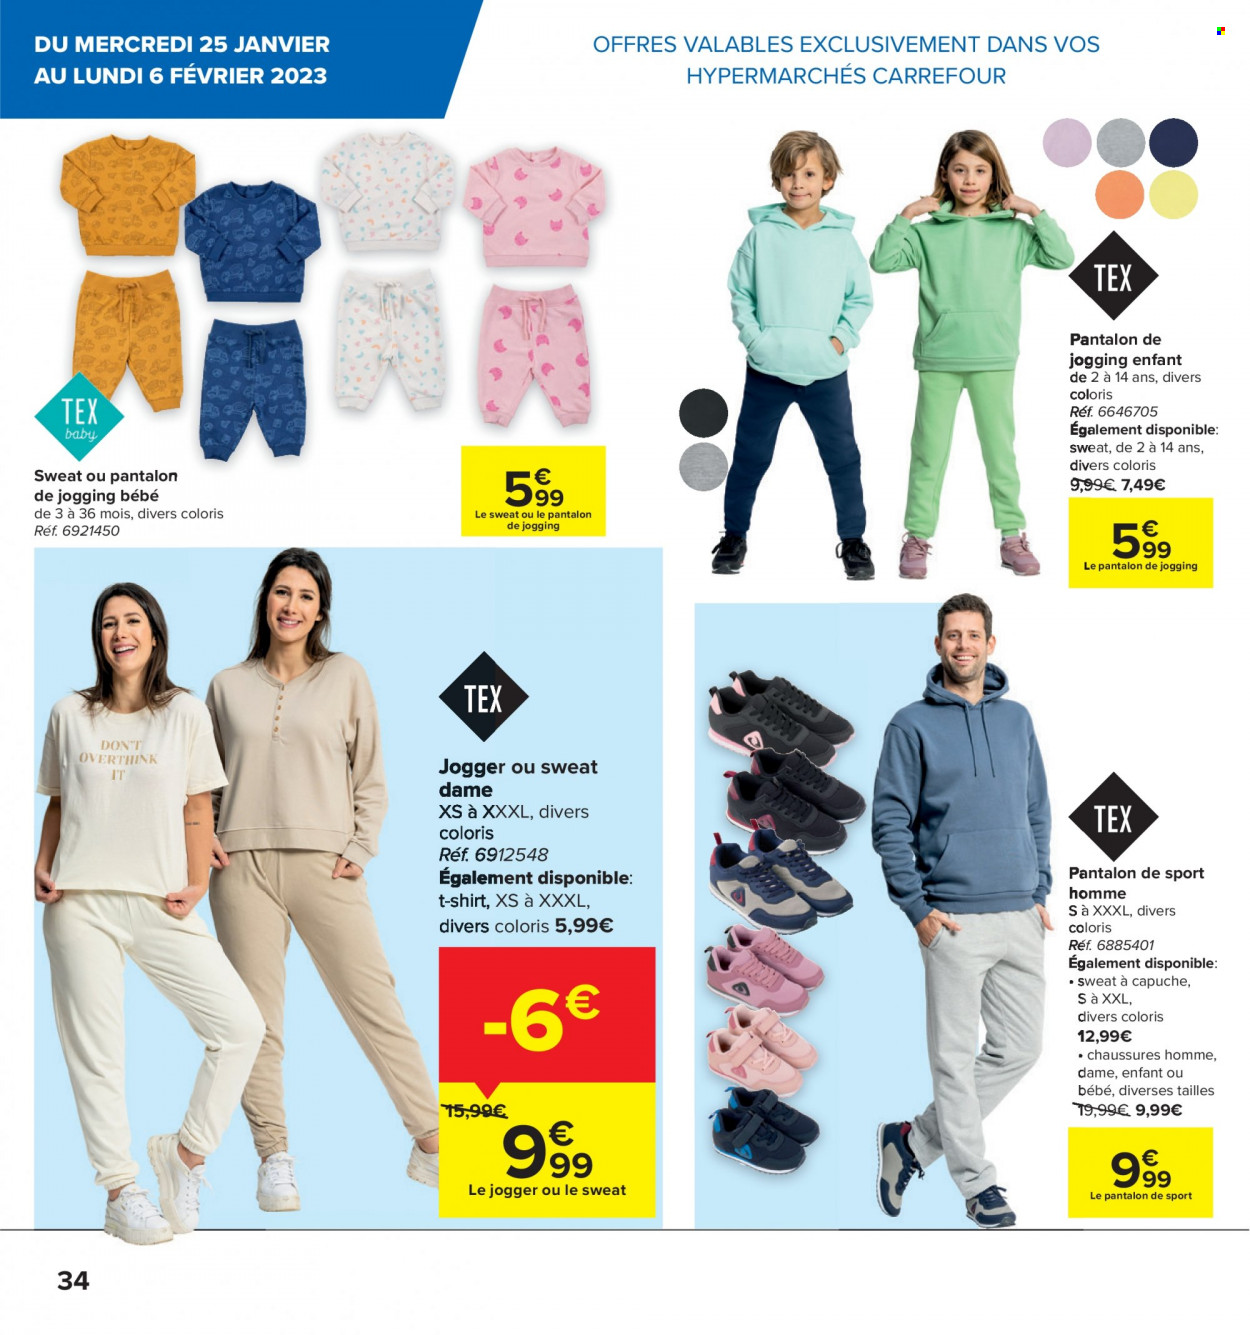 Catalogue Carrefour hypermarkt - 25.1.2023 - 6.2.2023. Page 14.